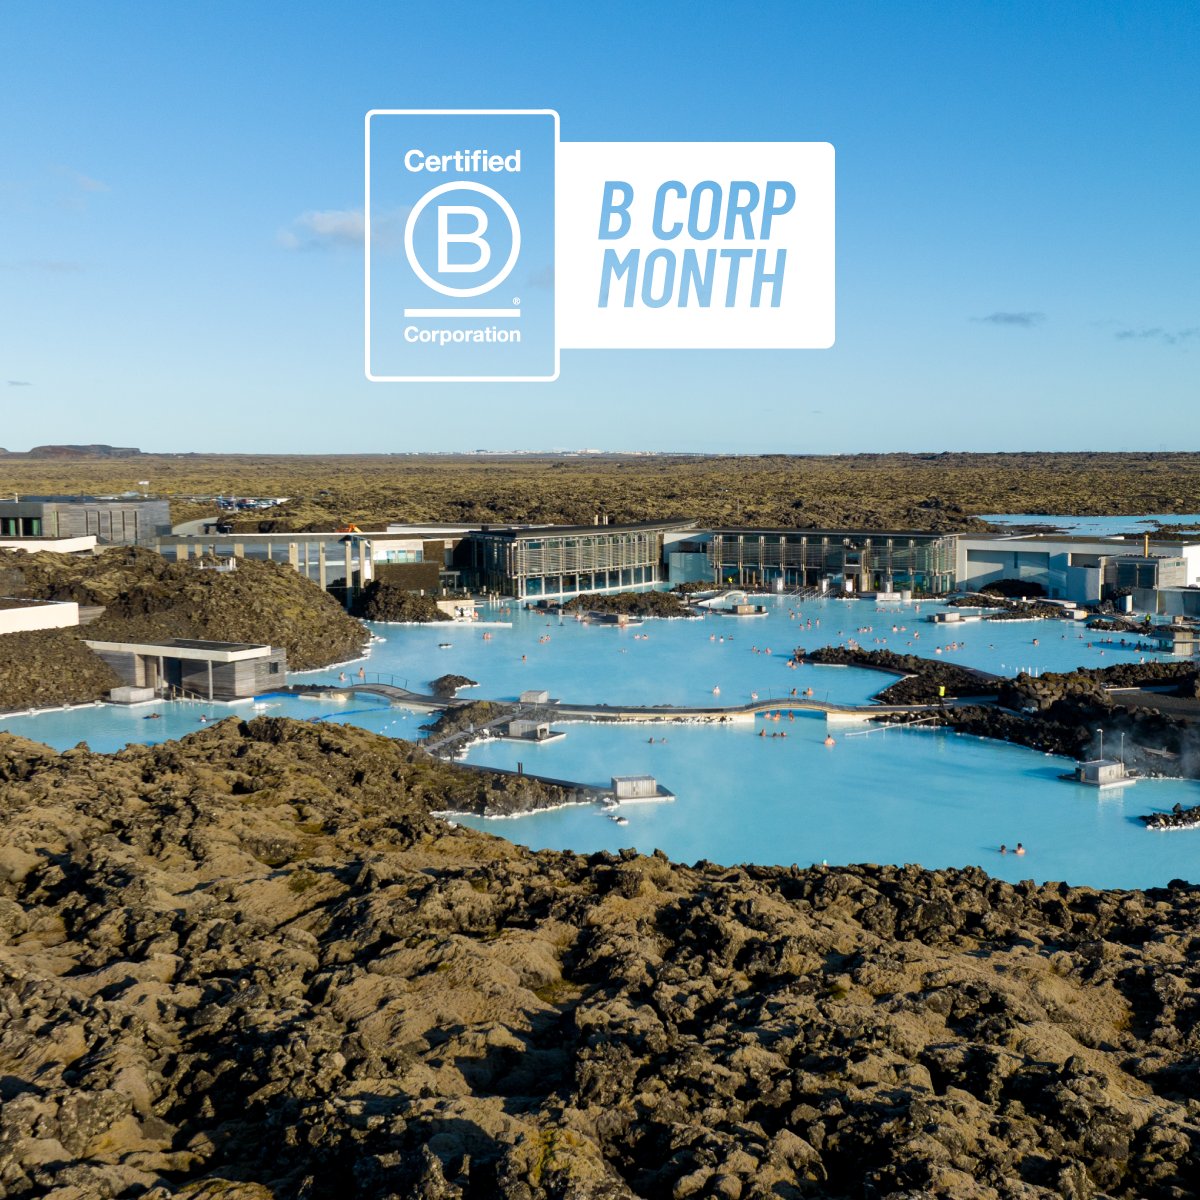 Let us introduce you to our ecocycle, describing the journey of our unique water. We harness all forms of emerging energy, from steam for heat and power to CO2 recycling. Finally, water returns to the earth, ready to start anew. #BlueLagoonIceland #BCorp #Iceland